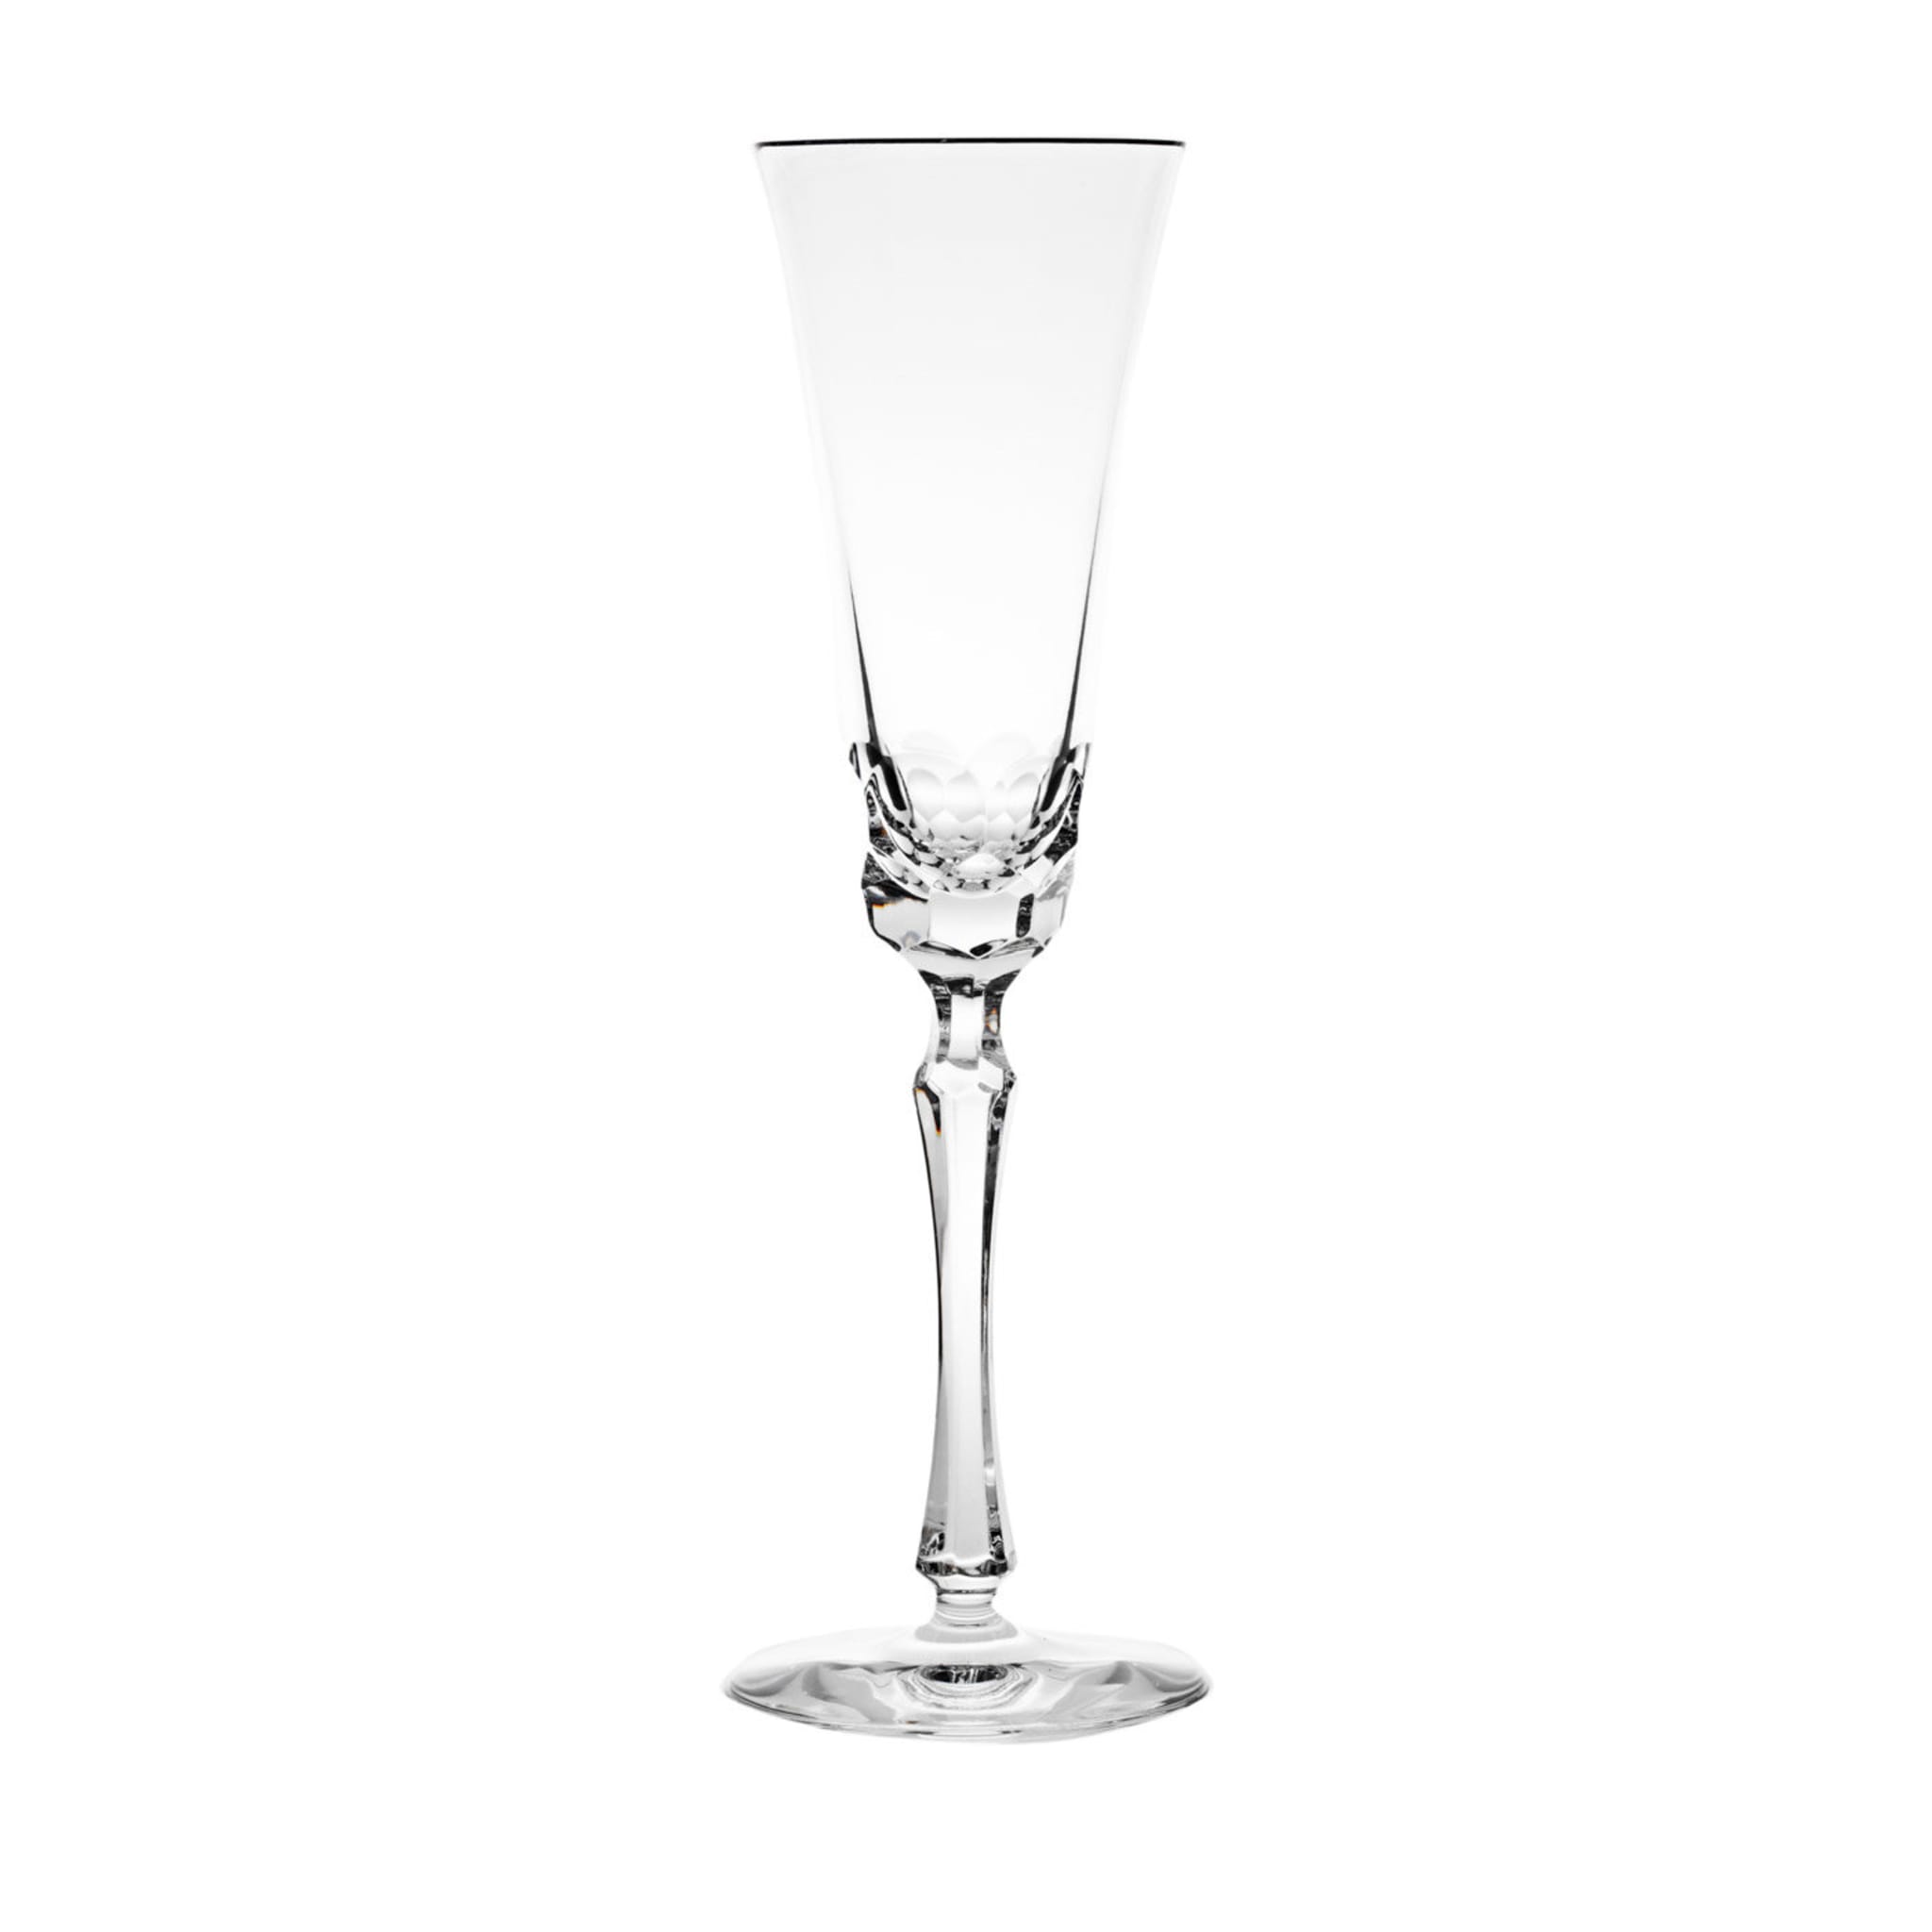 Set of 6 Narciso Crystal Flutes - Alternative view 2